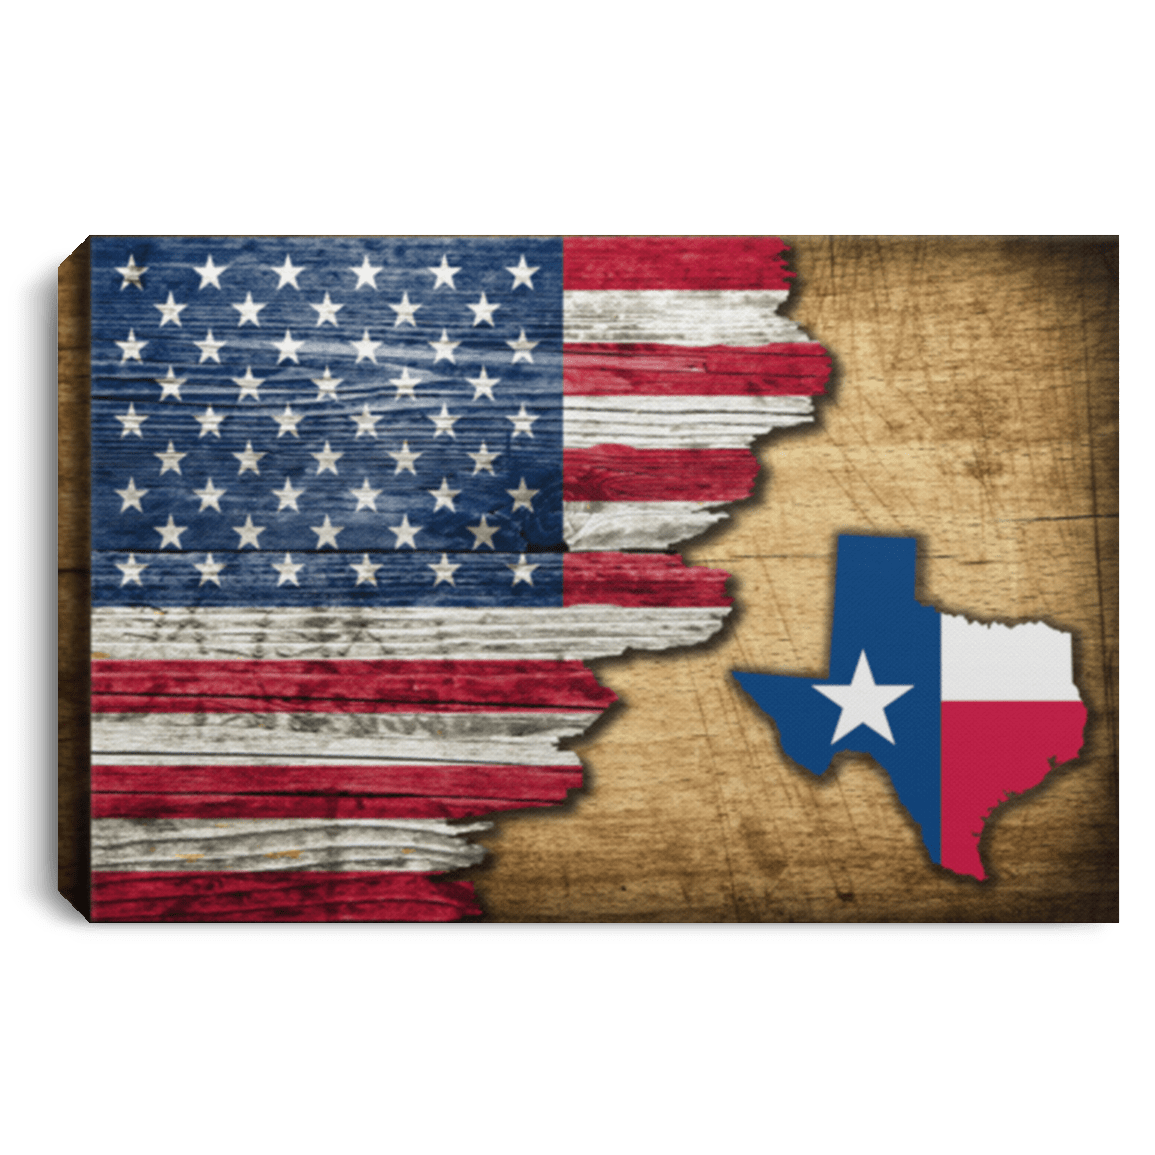 United States/Texas Flag Ripped Effect 12X8 Inches Landscape Canvas .75In Frame